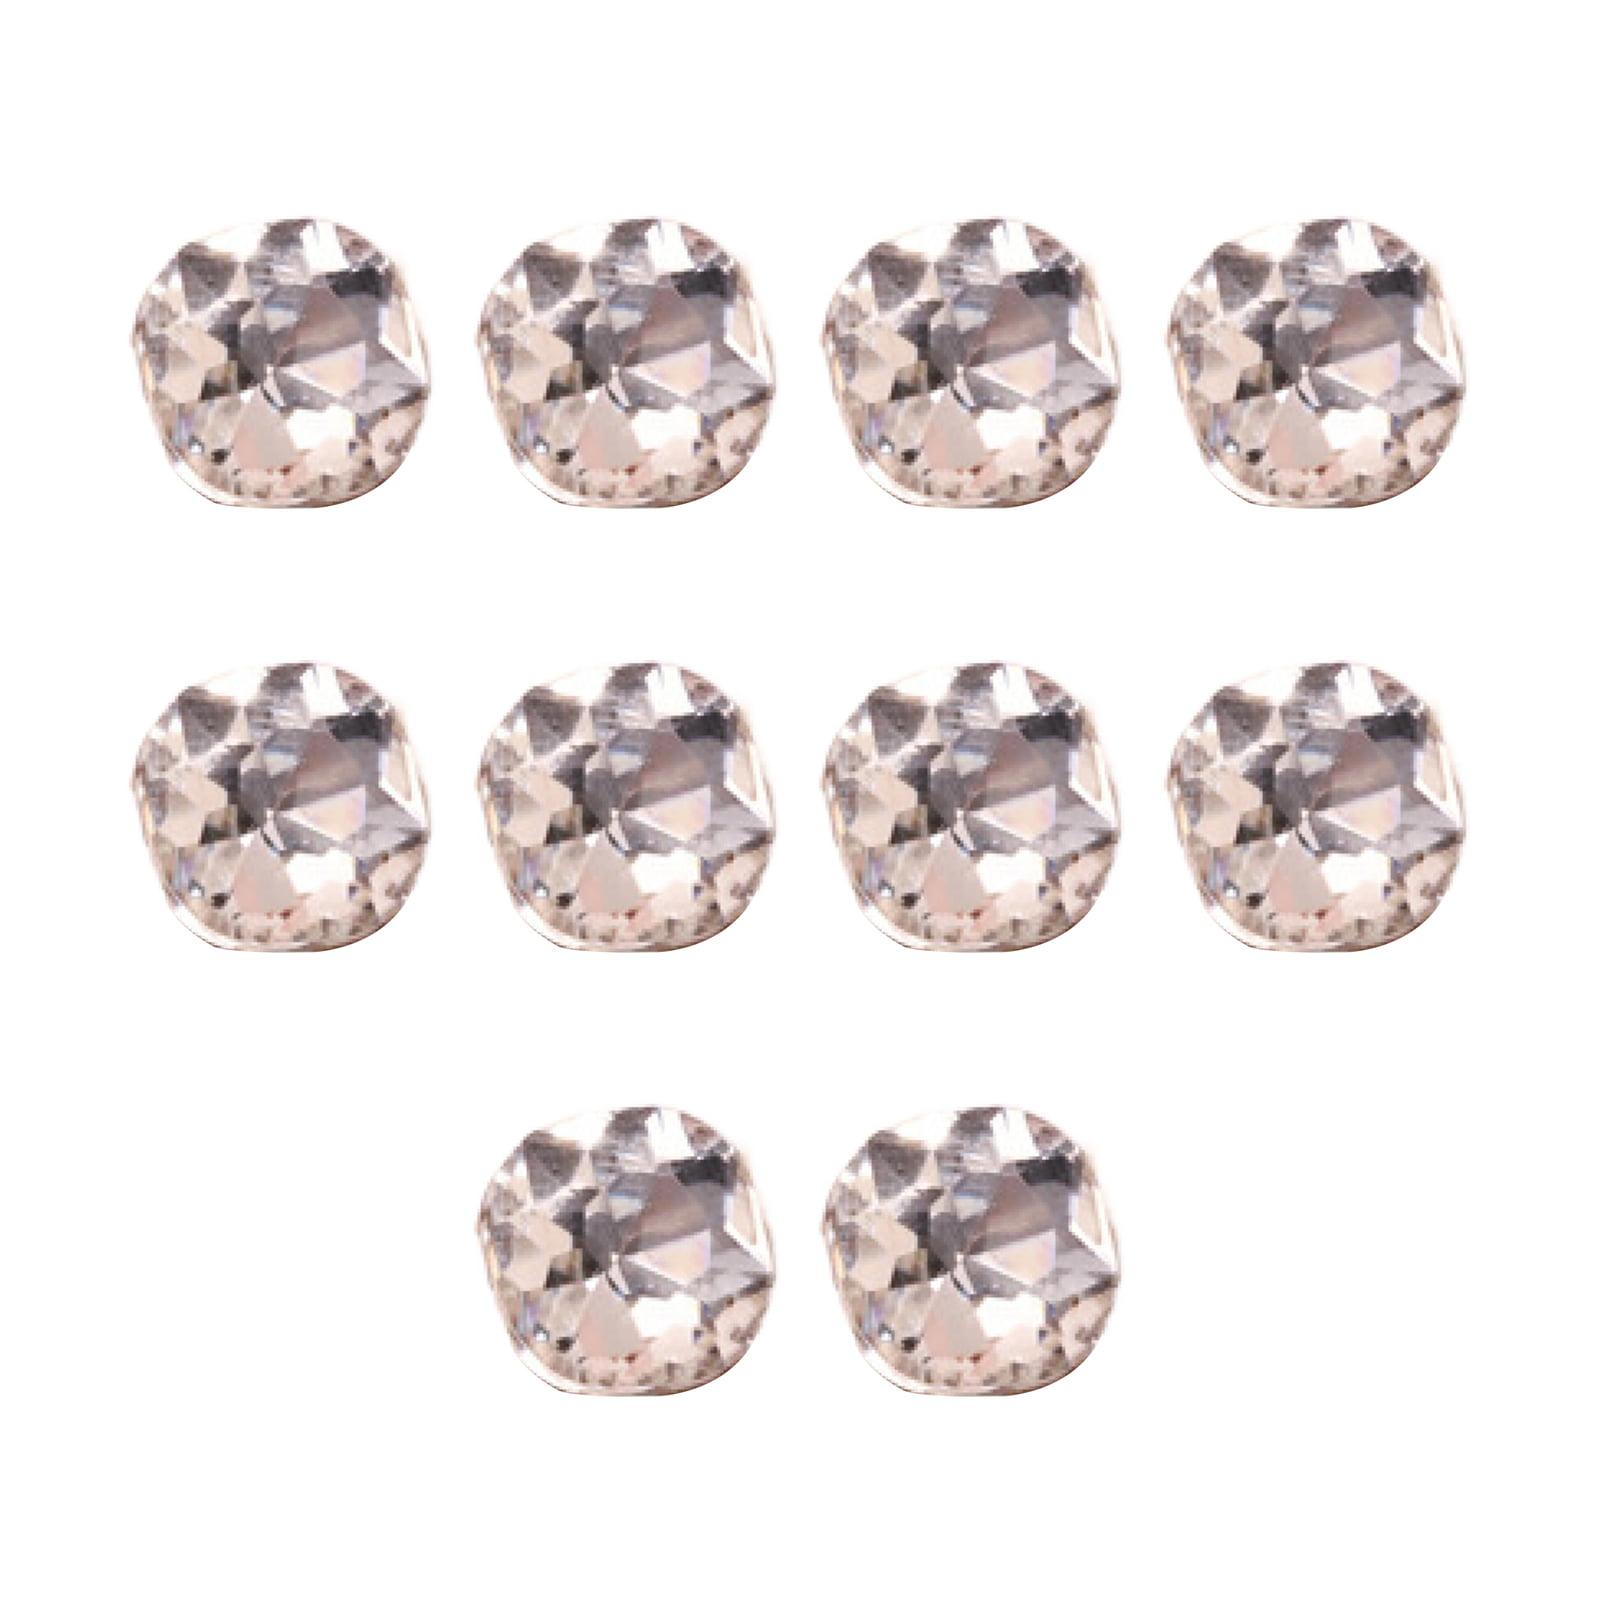 Kripyery 10Pcs Nail Art Jewelries 3D Bow Shape Rhinestones Sparkling Faux  Pearls Nail Charms Decoration for Nail Salon